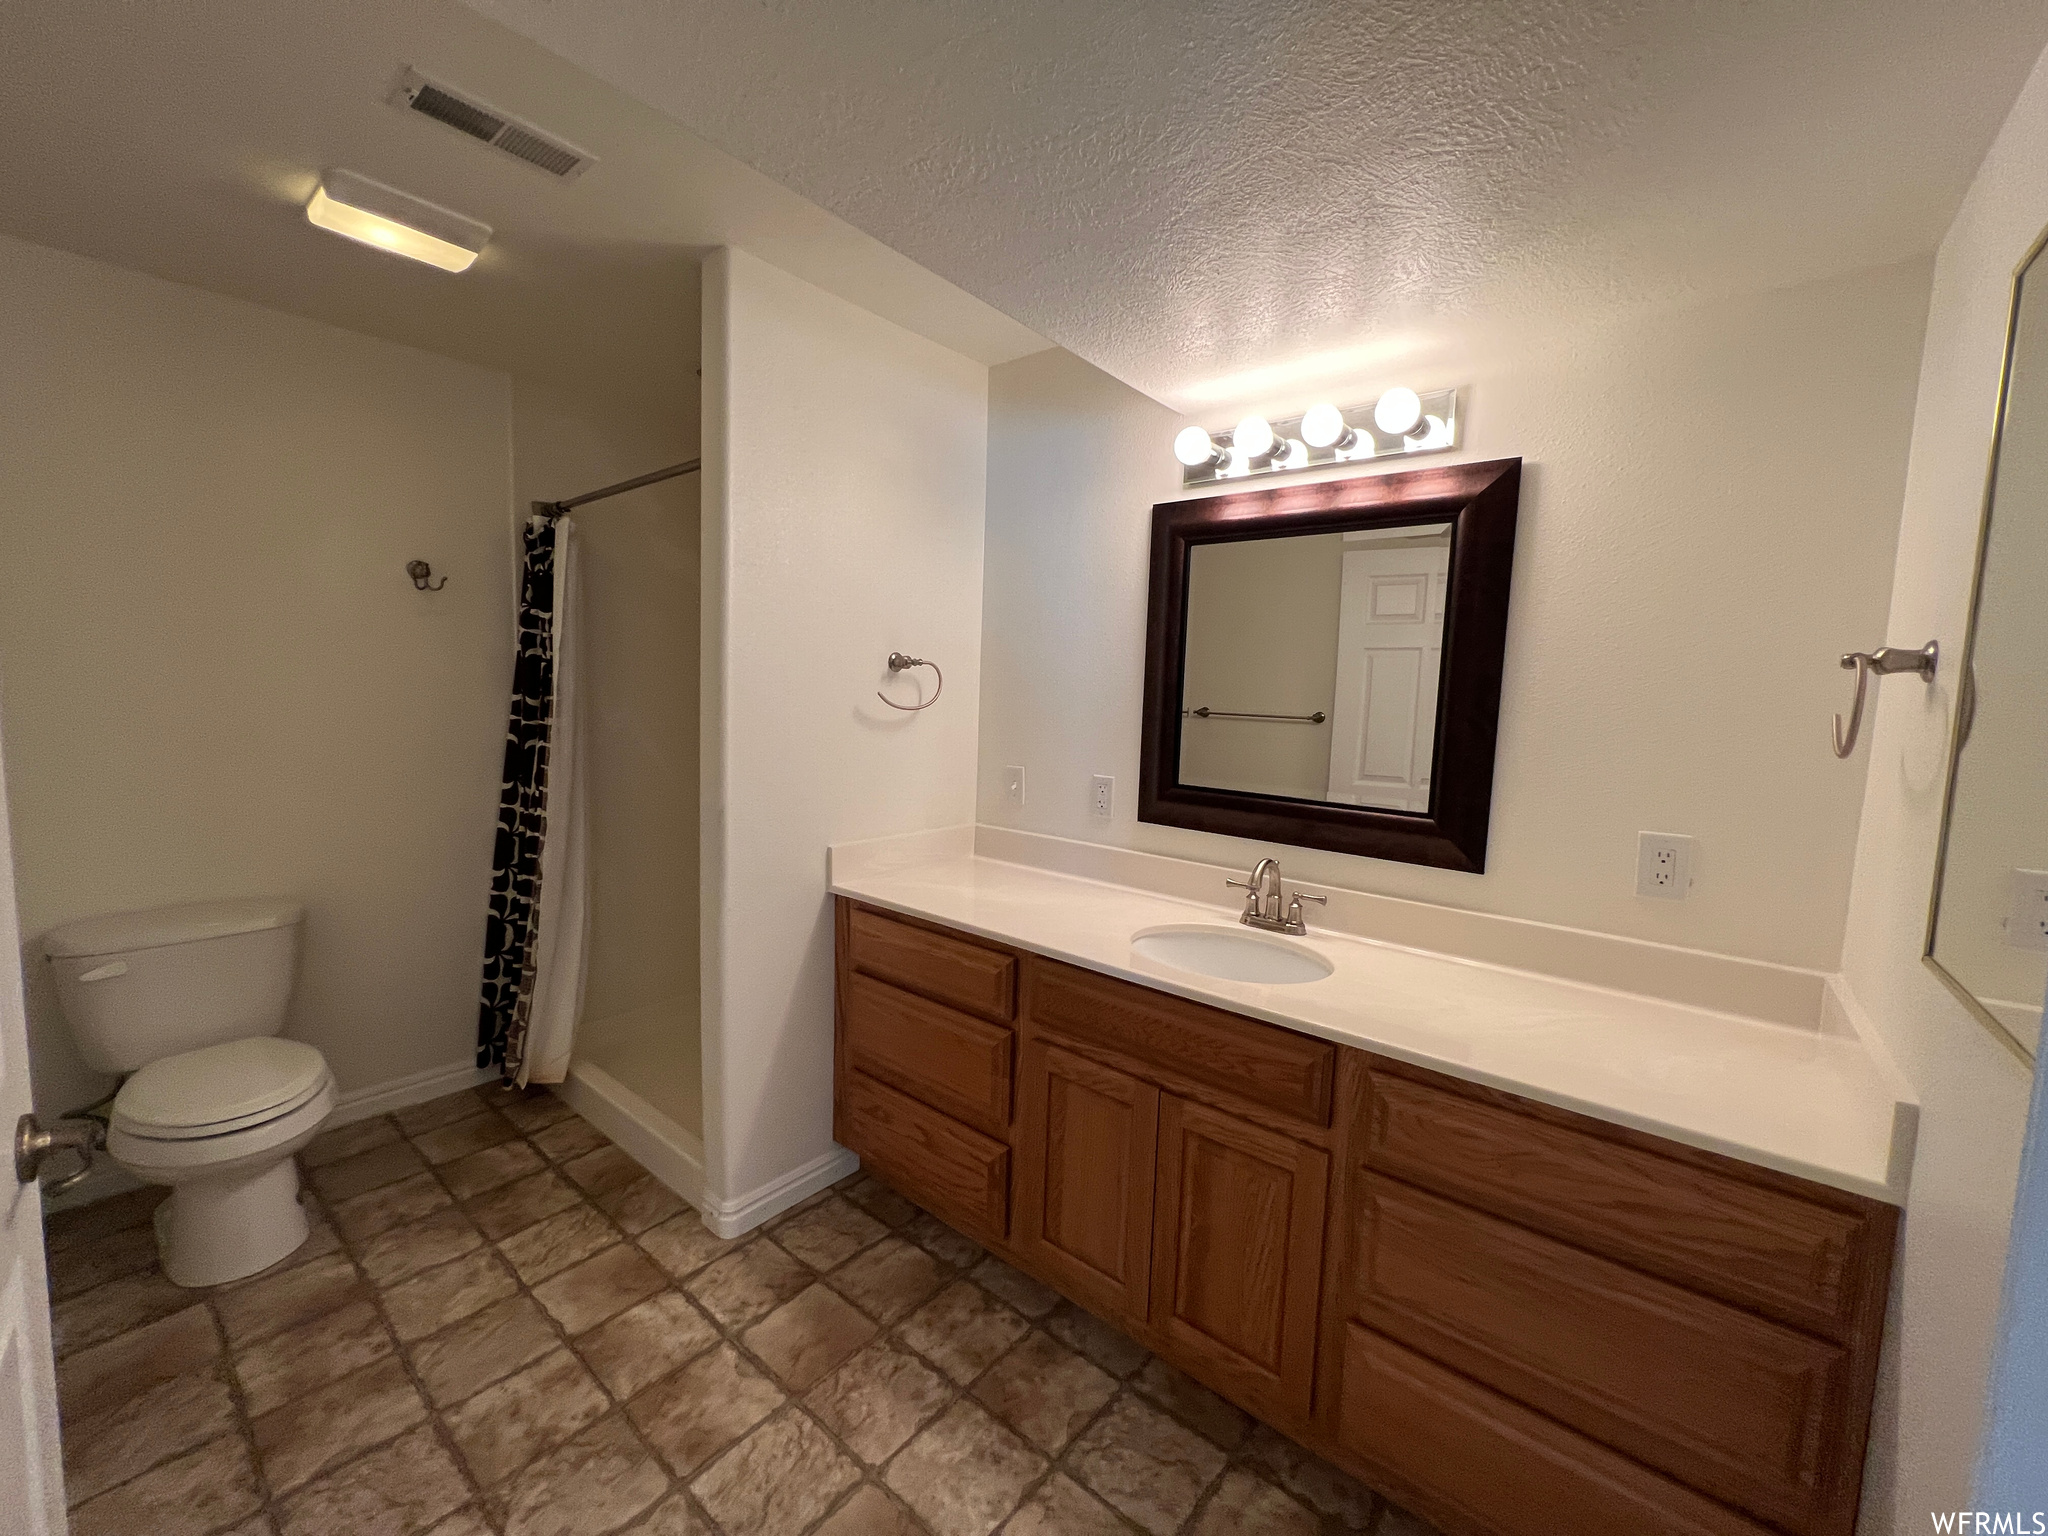 Bathroom featuring vanity, a textured ceiling, mirror, and tile flooring